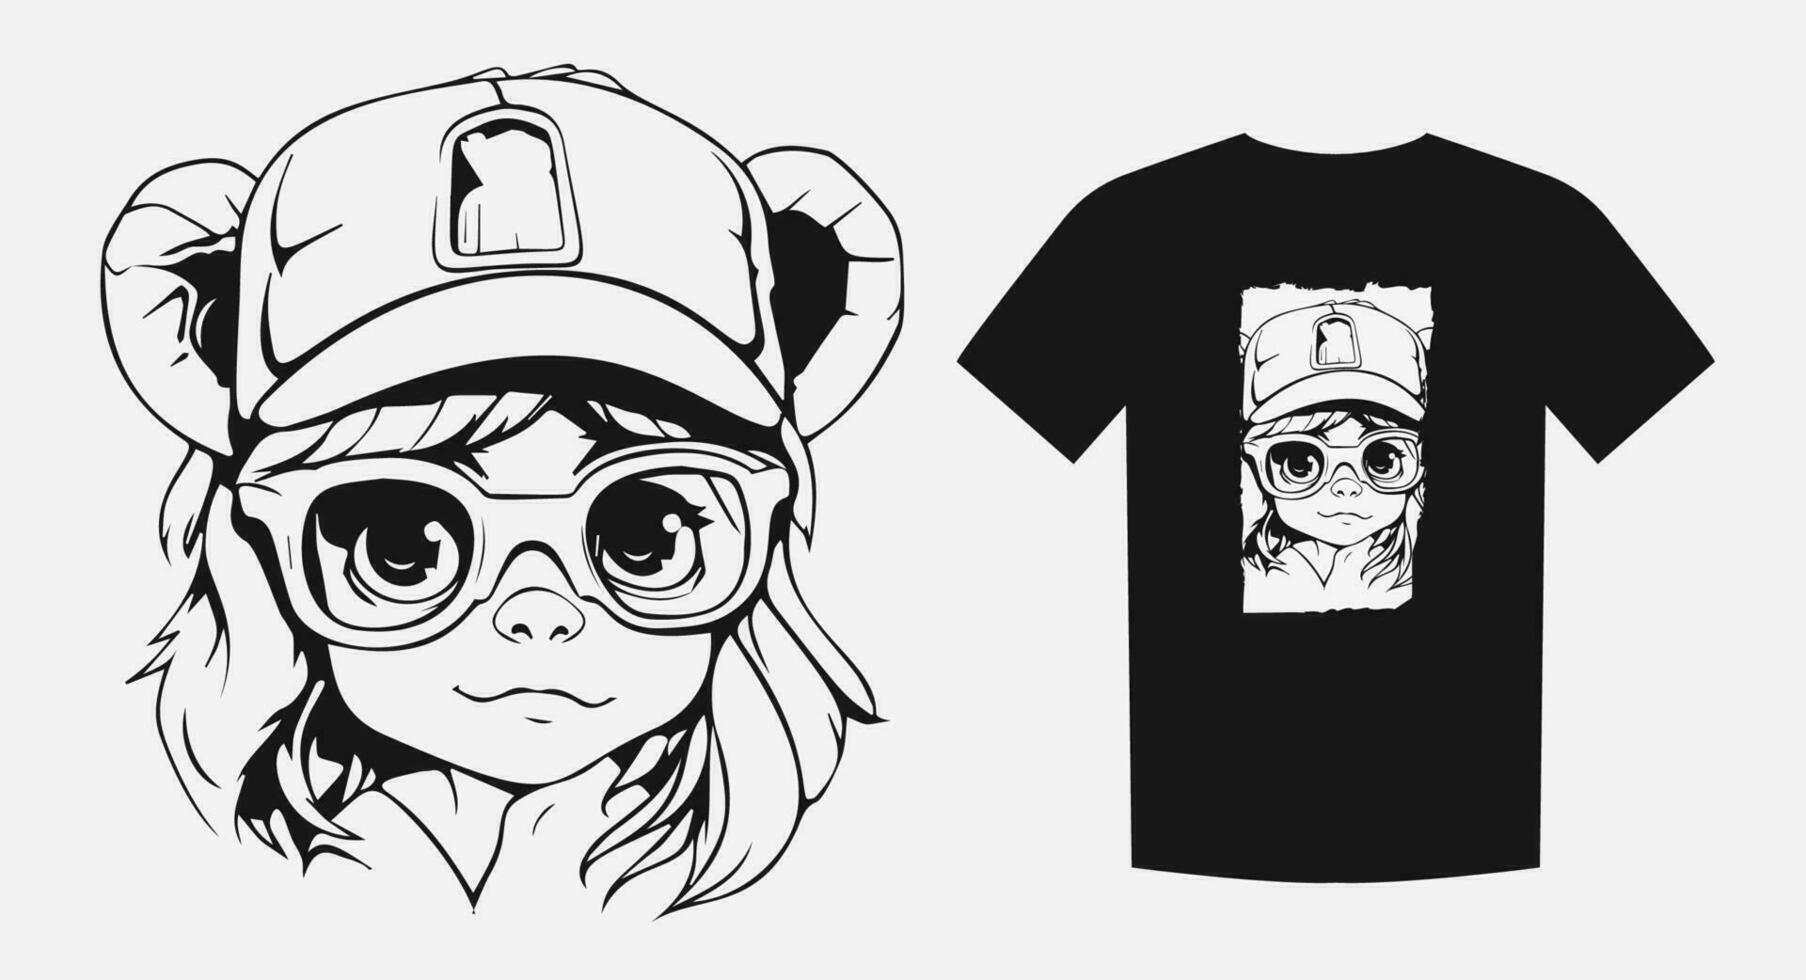 Vintage-style cartoon portrait of a cute girl in a cap with earflaps and glasses. Perfect for prints, shirts, and logos. Expressive and nostalgic. Vector illustration.